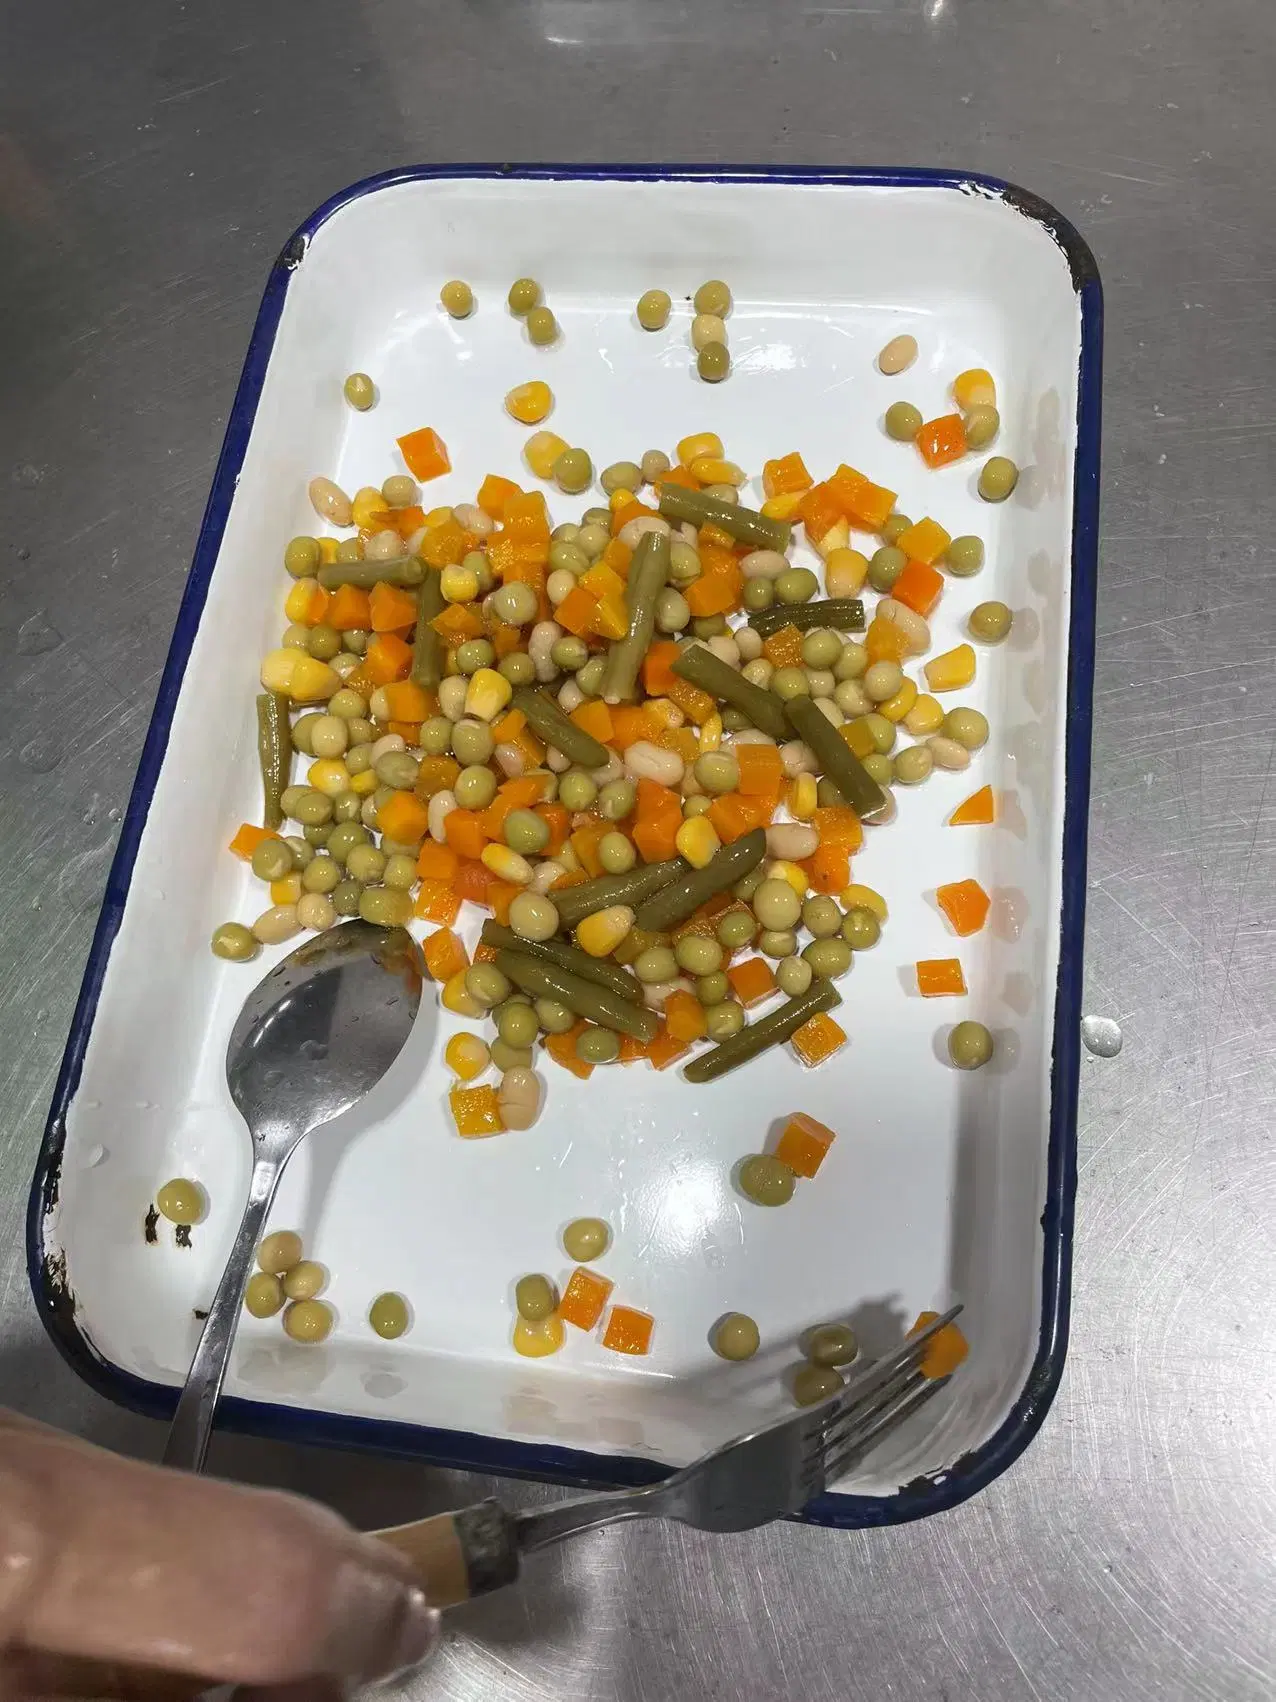 Canned Mixed Vegetables in Tins Corn Carrot Green Beans Green Peas